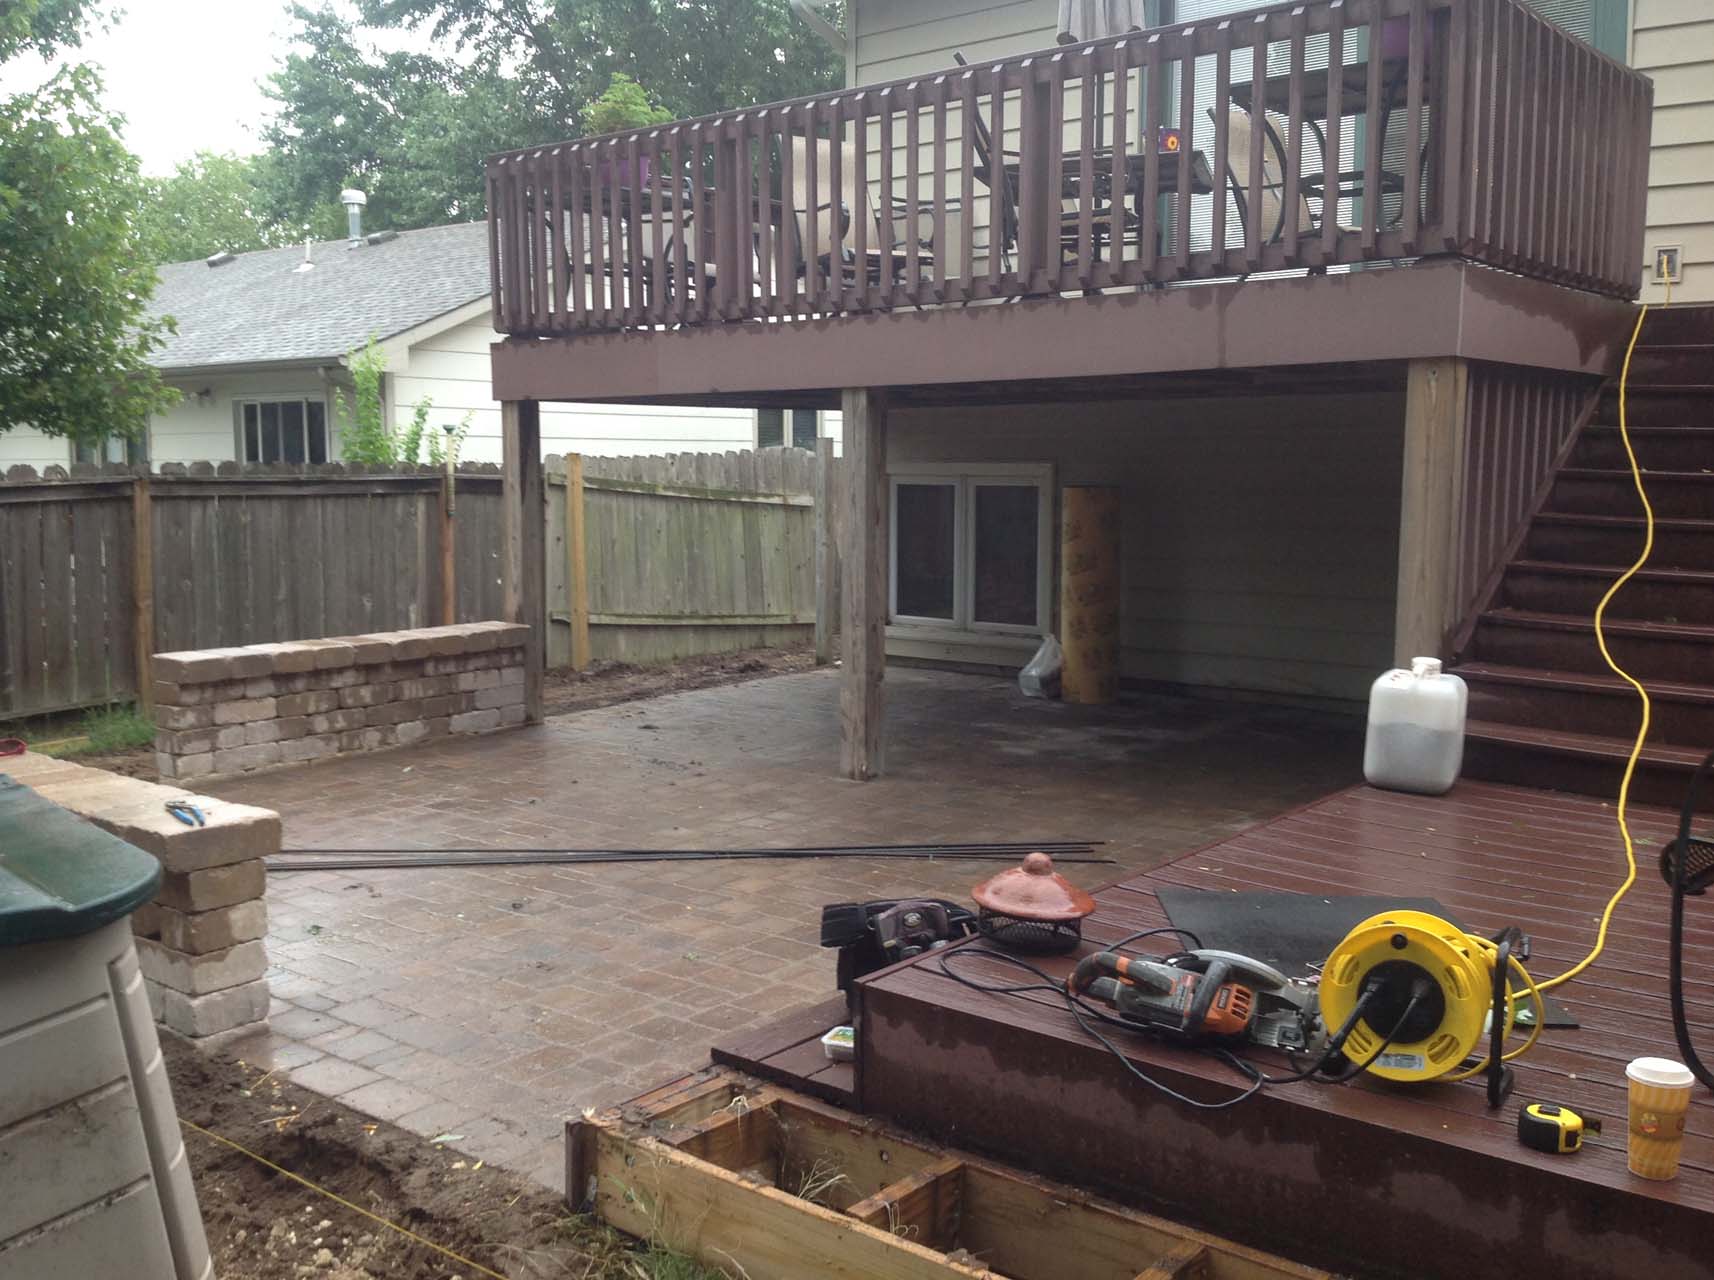 A brick patio starts to come together